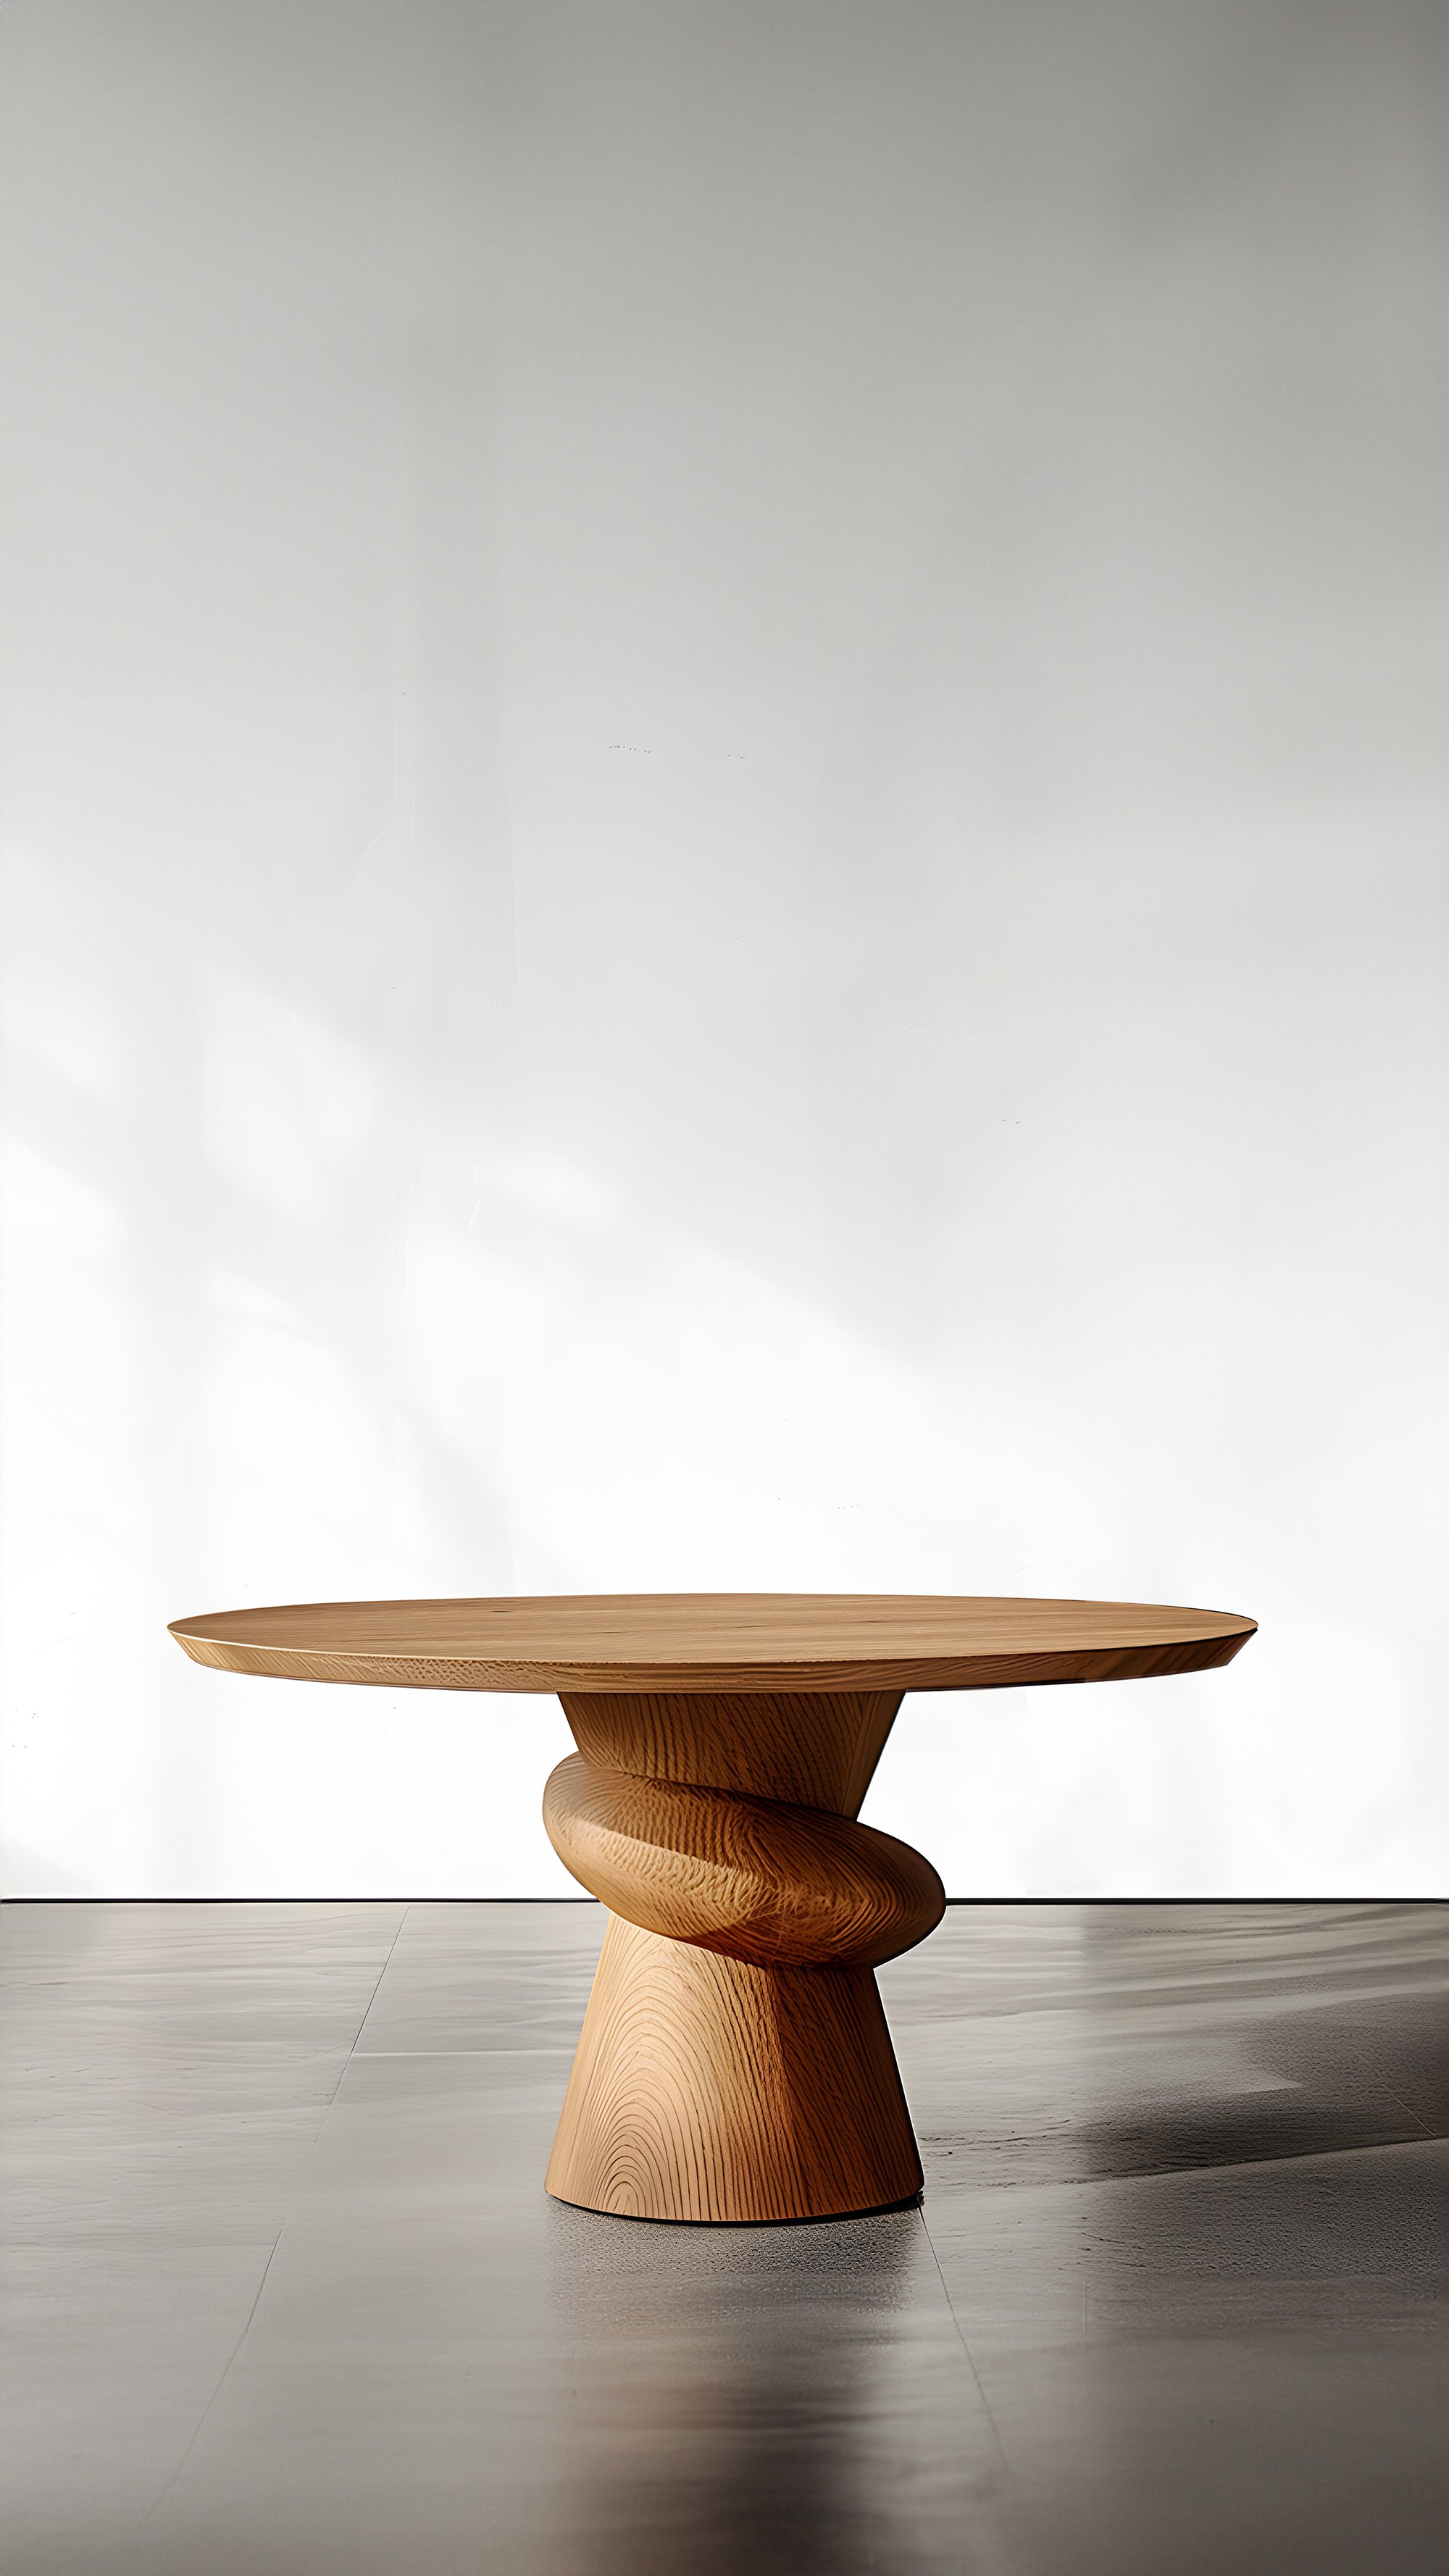 Desks and Writing Tables No09, Socle Series by Joel Escalona, Wood Craft - 4.jpg